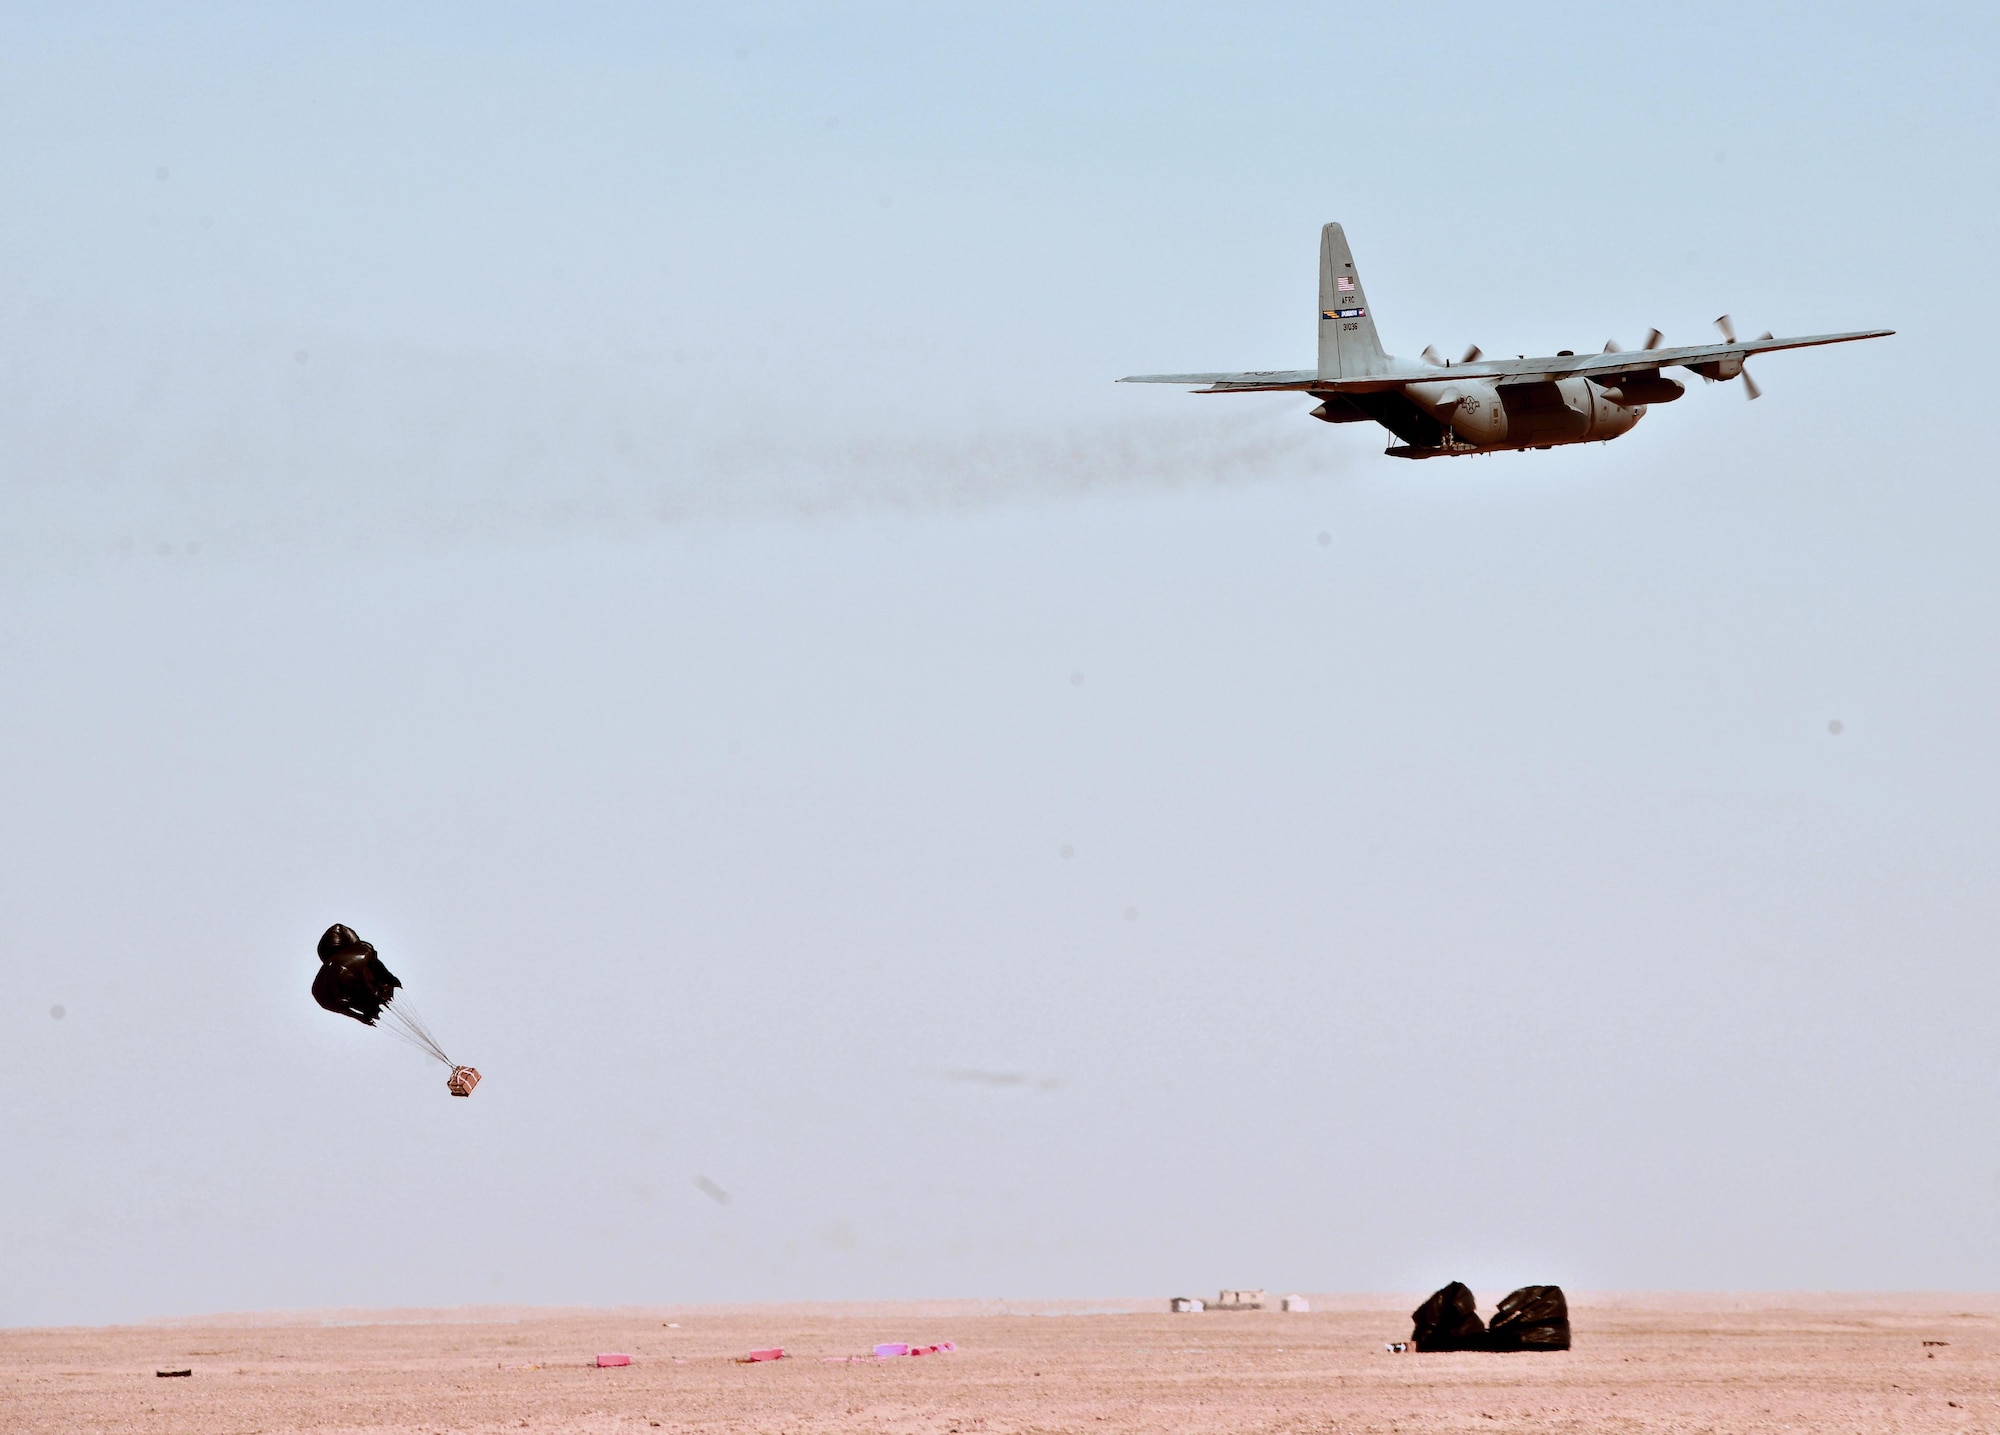 SOUTHWEST ASIA - A C-130 from the 737th Expeditionary Airlift Squadron drops a pallet during drop zone control officer training Feb. 10, 2015. The training helped Airmen from the 82nd Expeditionary Air Support Operations Squadron practice calling in aircraft for resupply drops. (U.S. Air Force photo by Tech. Sgt. Jared Marquis/released)